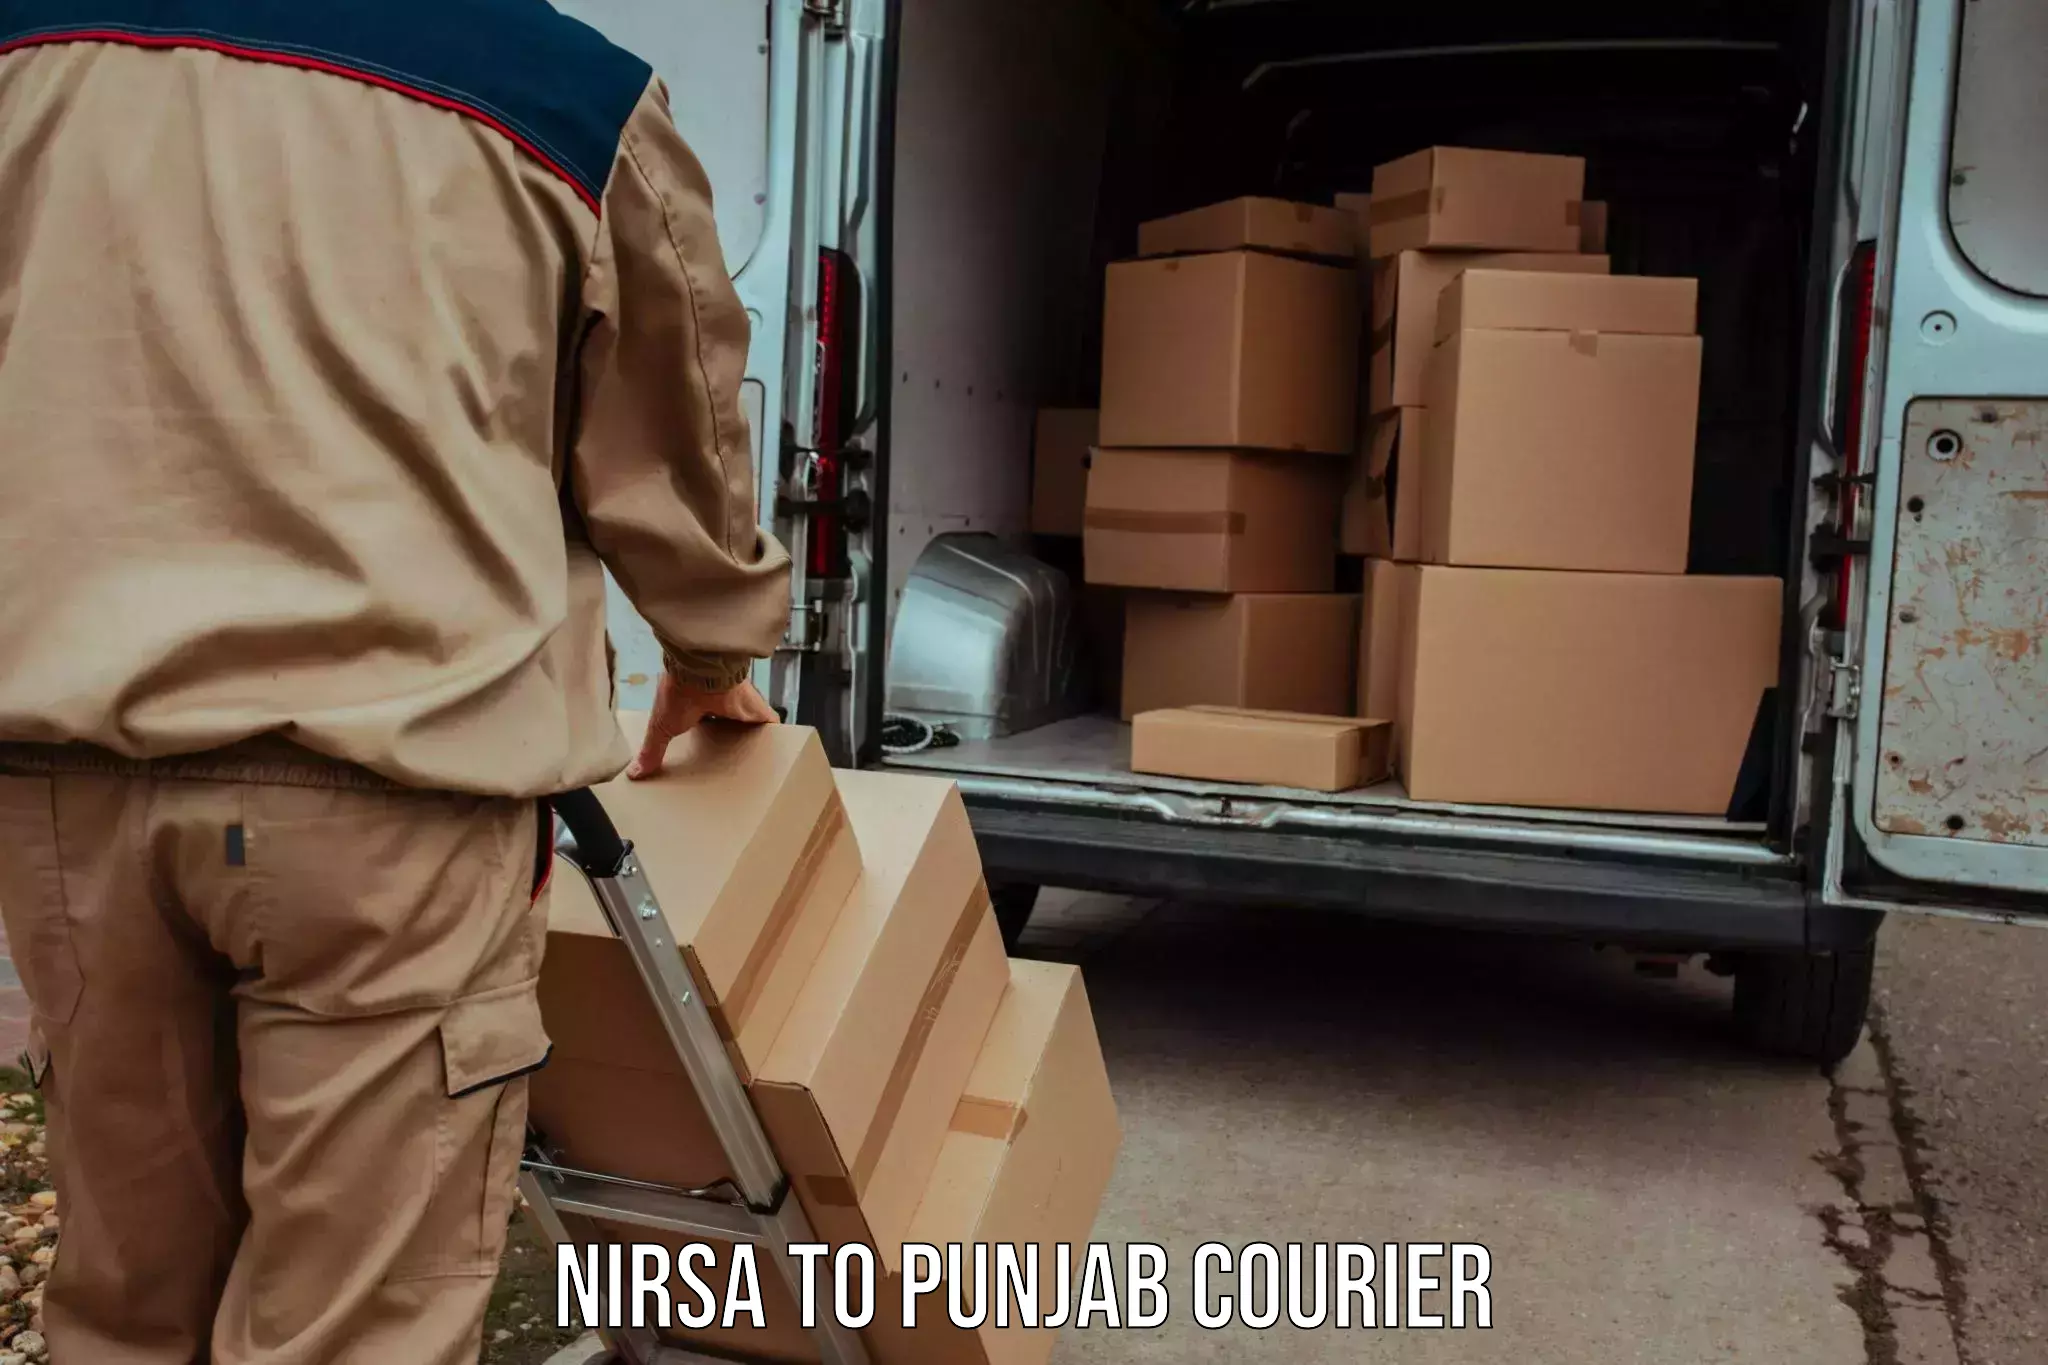 Next-day delivery options Nirsa to Bathinda